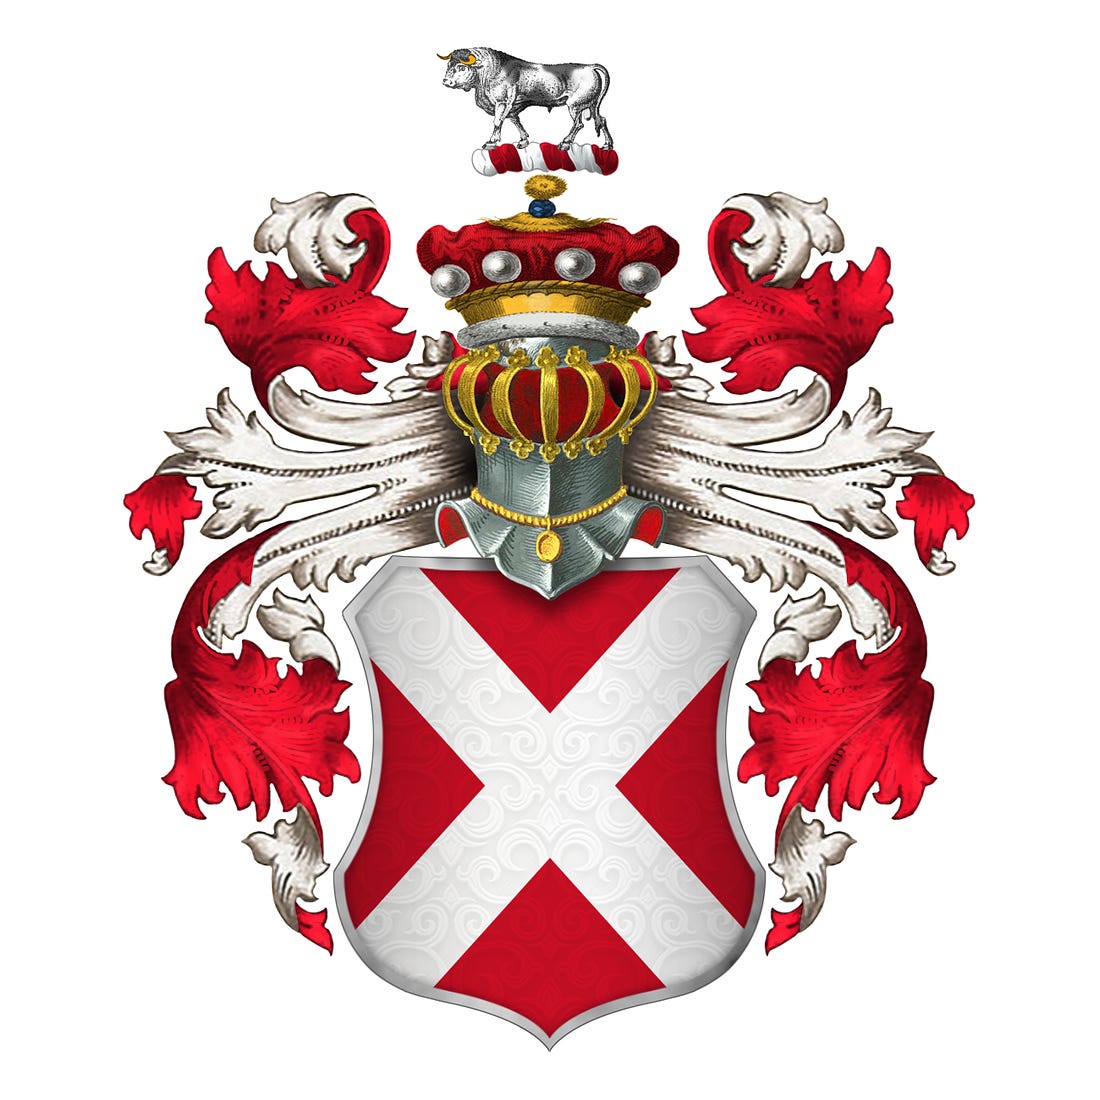 A white x on red full coat of arms for the barons of raby